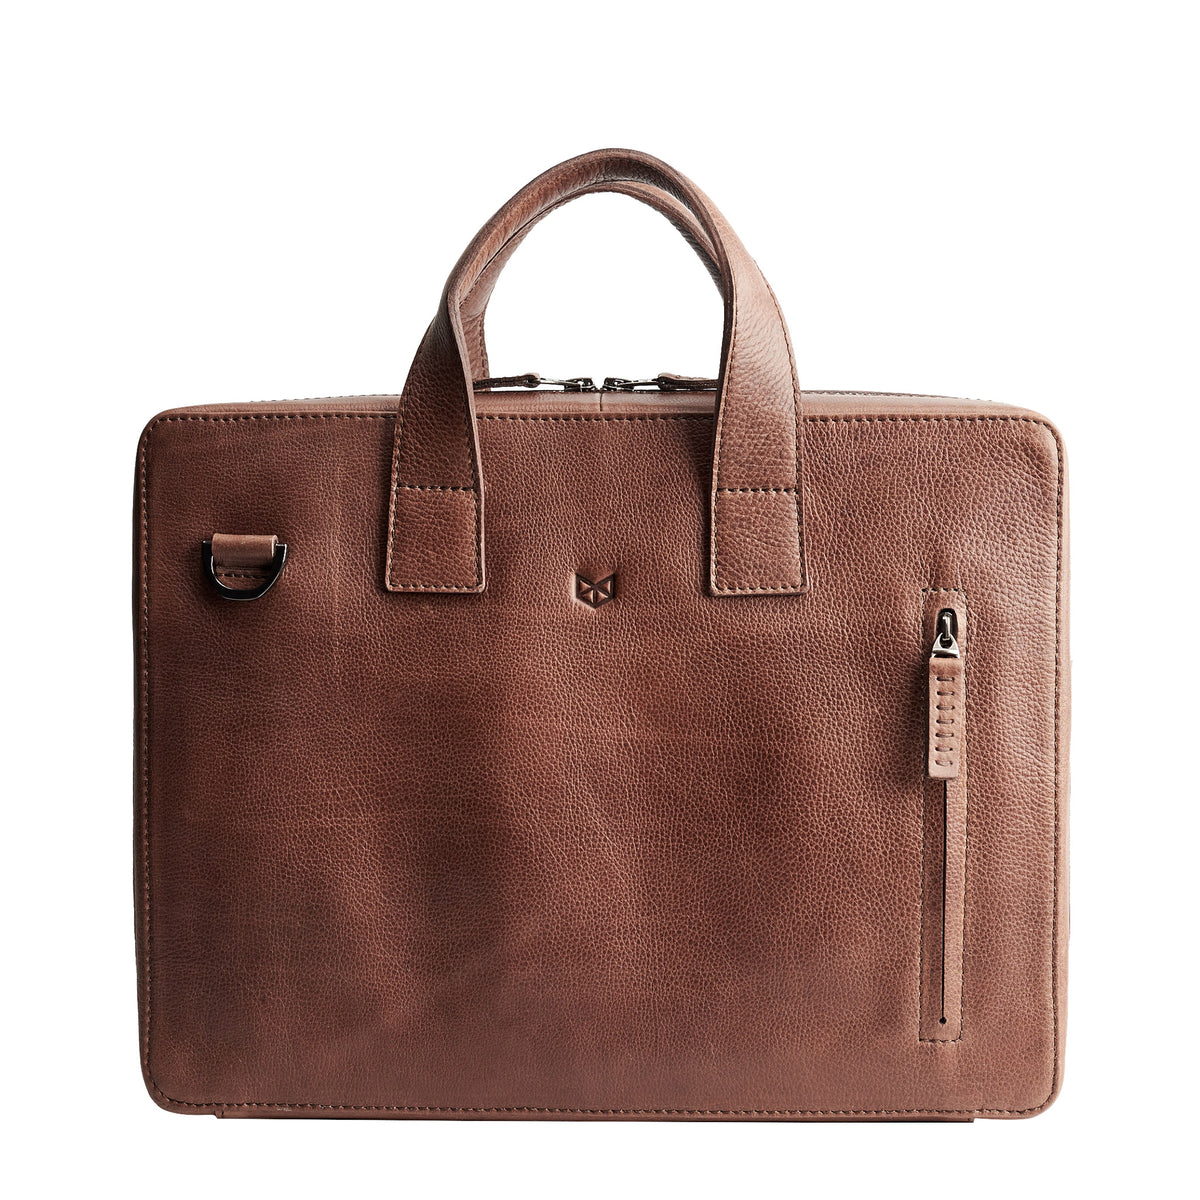 Brown leather workbag for men. Unique office style bag